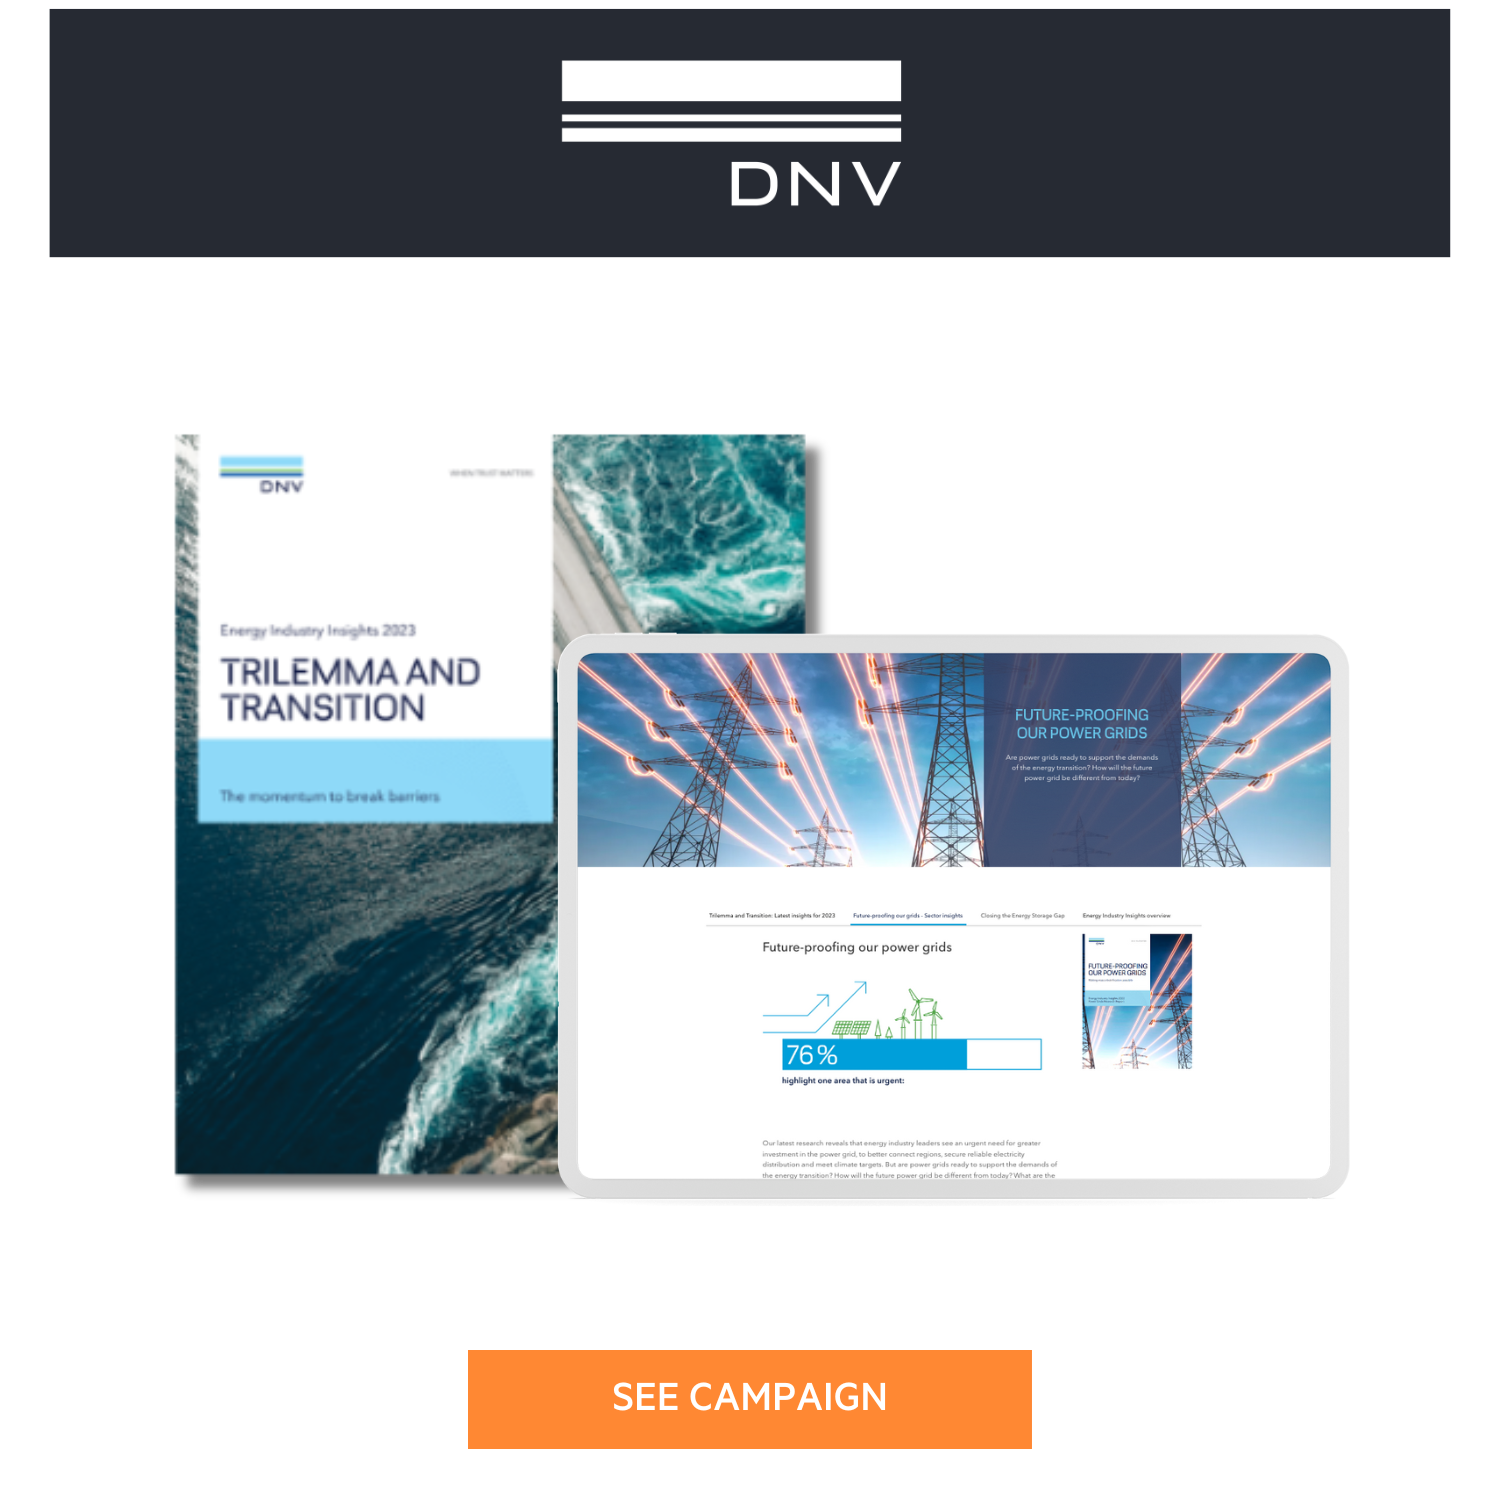 DNV and FT Longitude transform a long-established, industry-leading report into a future-proofed thought leadership programme with a clear mission.